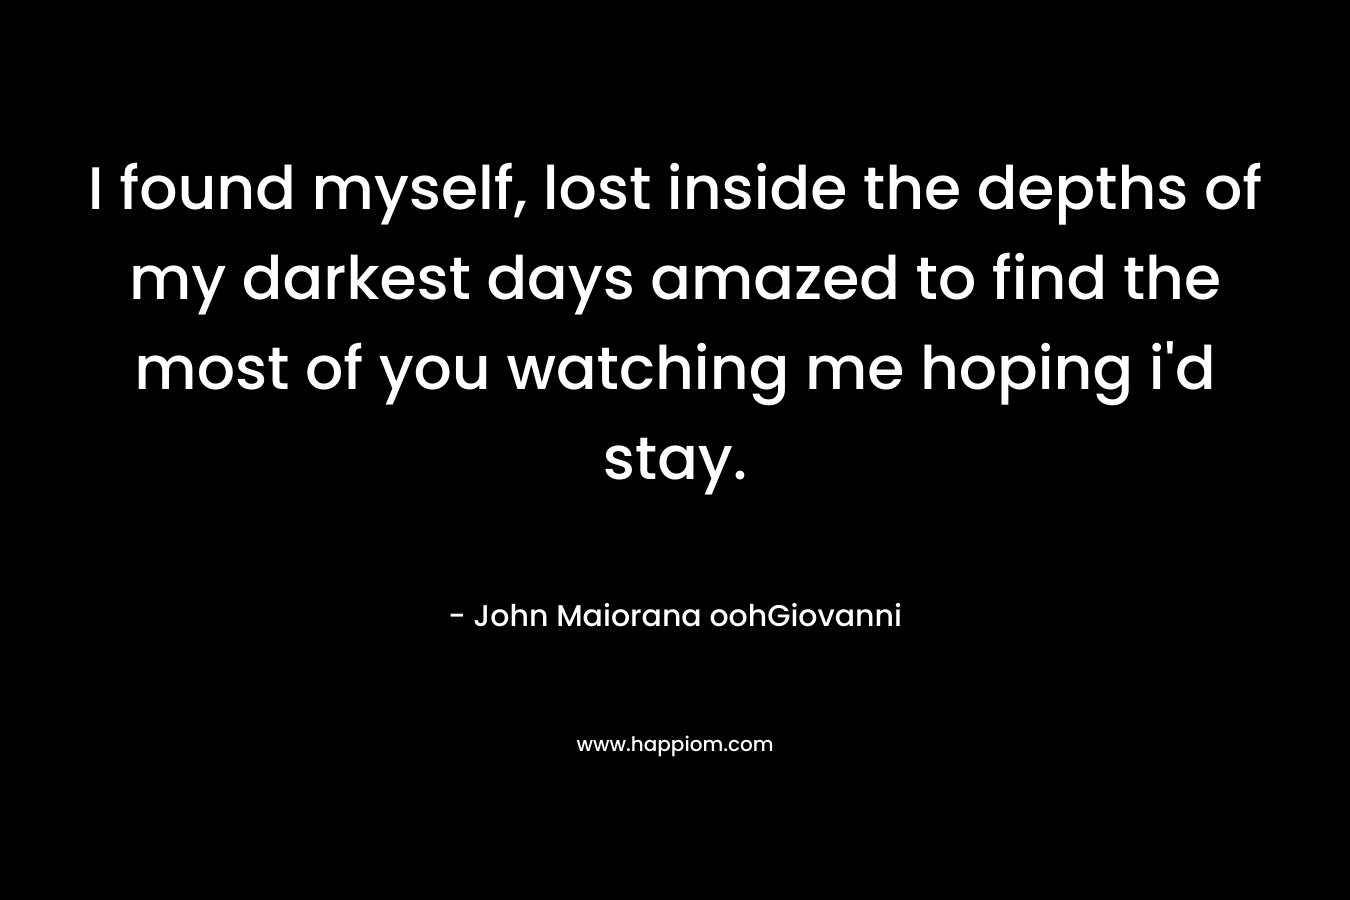 I found myself, lost inside the depths of my darkest days amazed to find the most of you watching me hoping i’d stay. – John Maiorana oohGiovanni